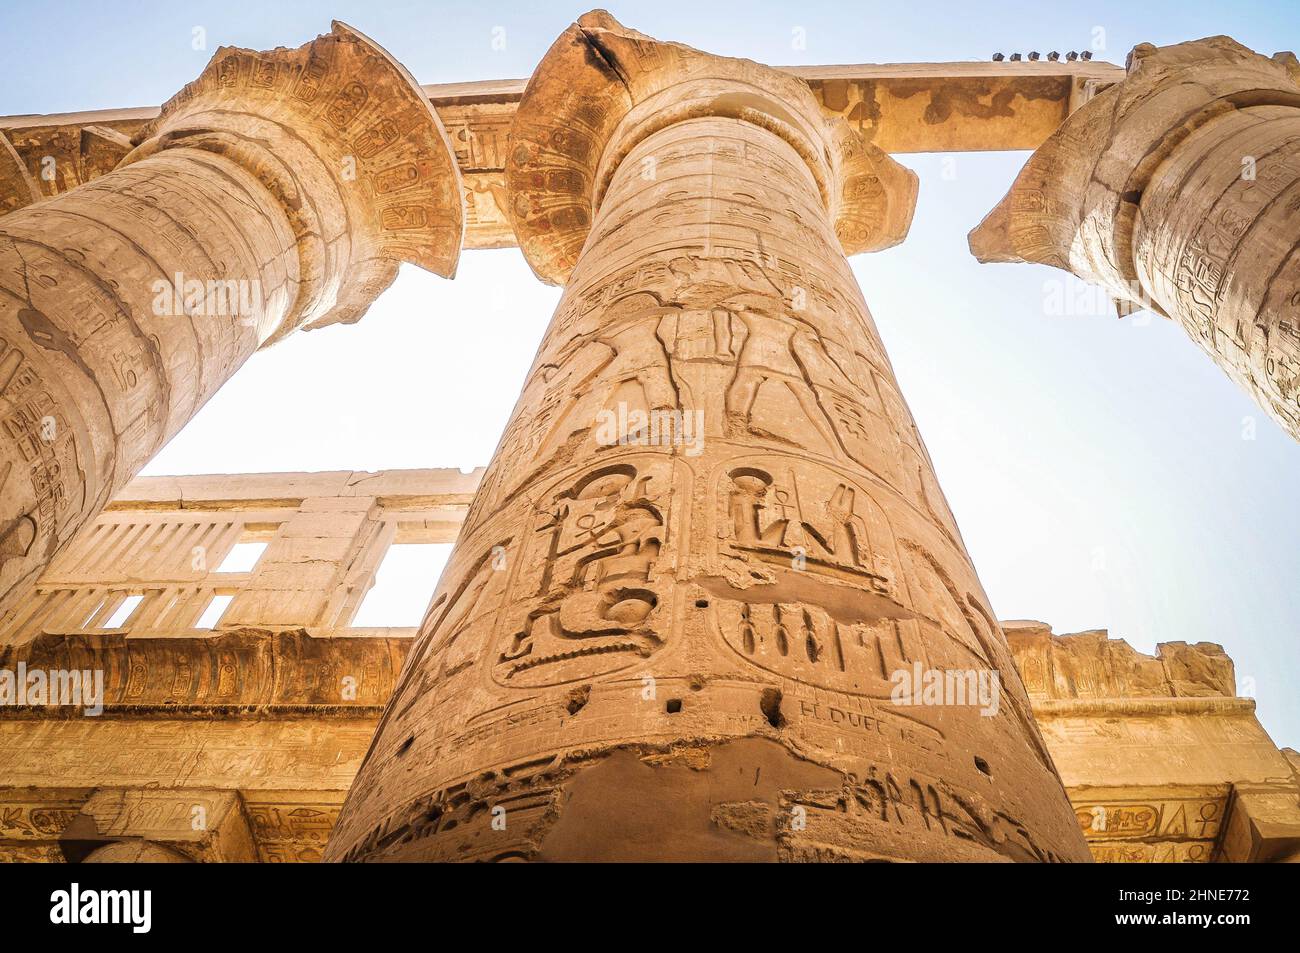 The Karnak Temple Complex, commonly known as Karnak, comprises a vast mix of decayed temples, pylons, chapels, and other buildings near Luxor, Egypt. Stock Photo